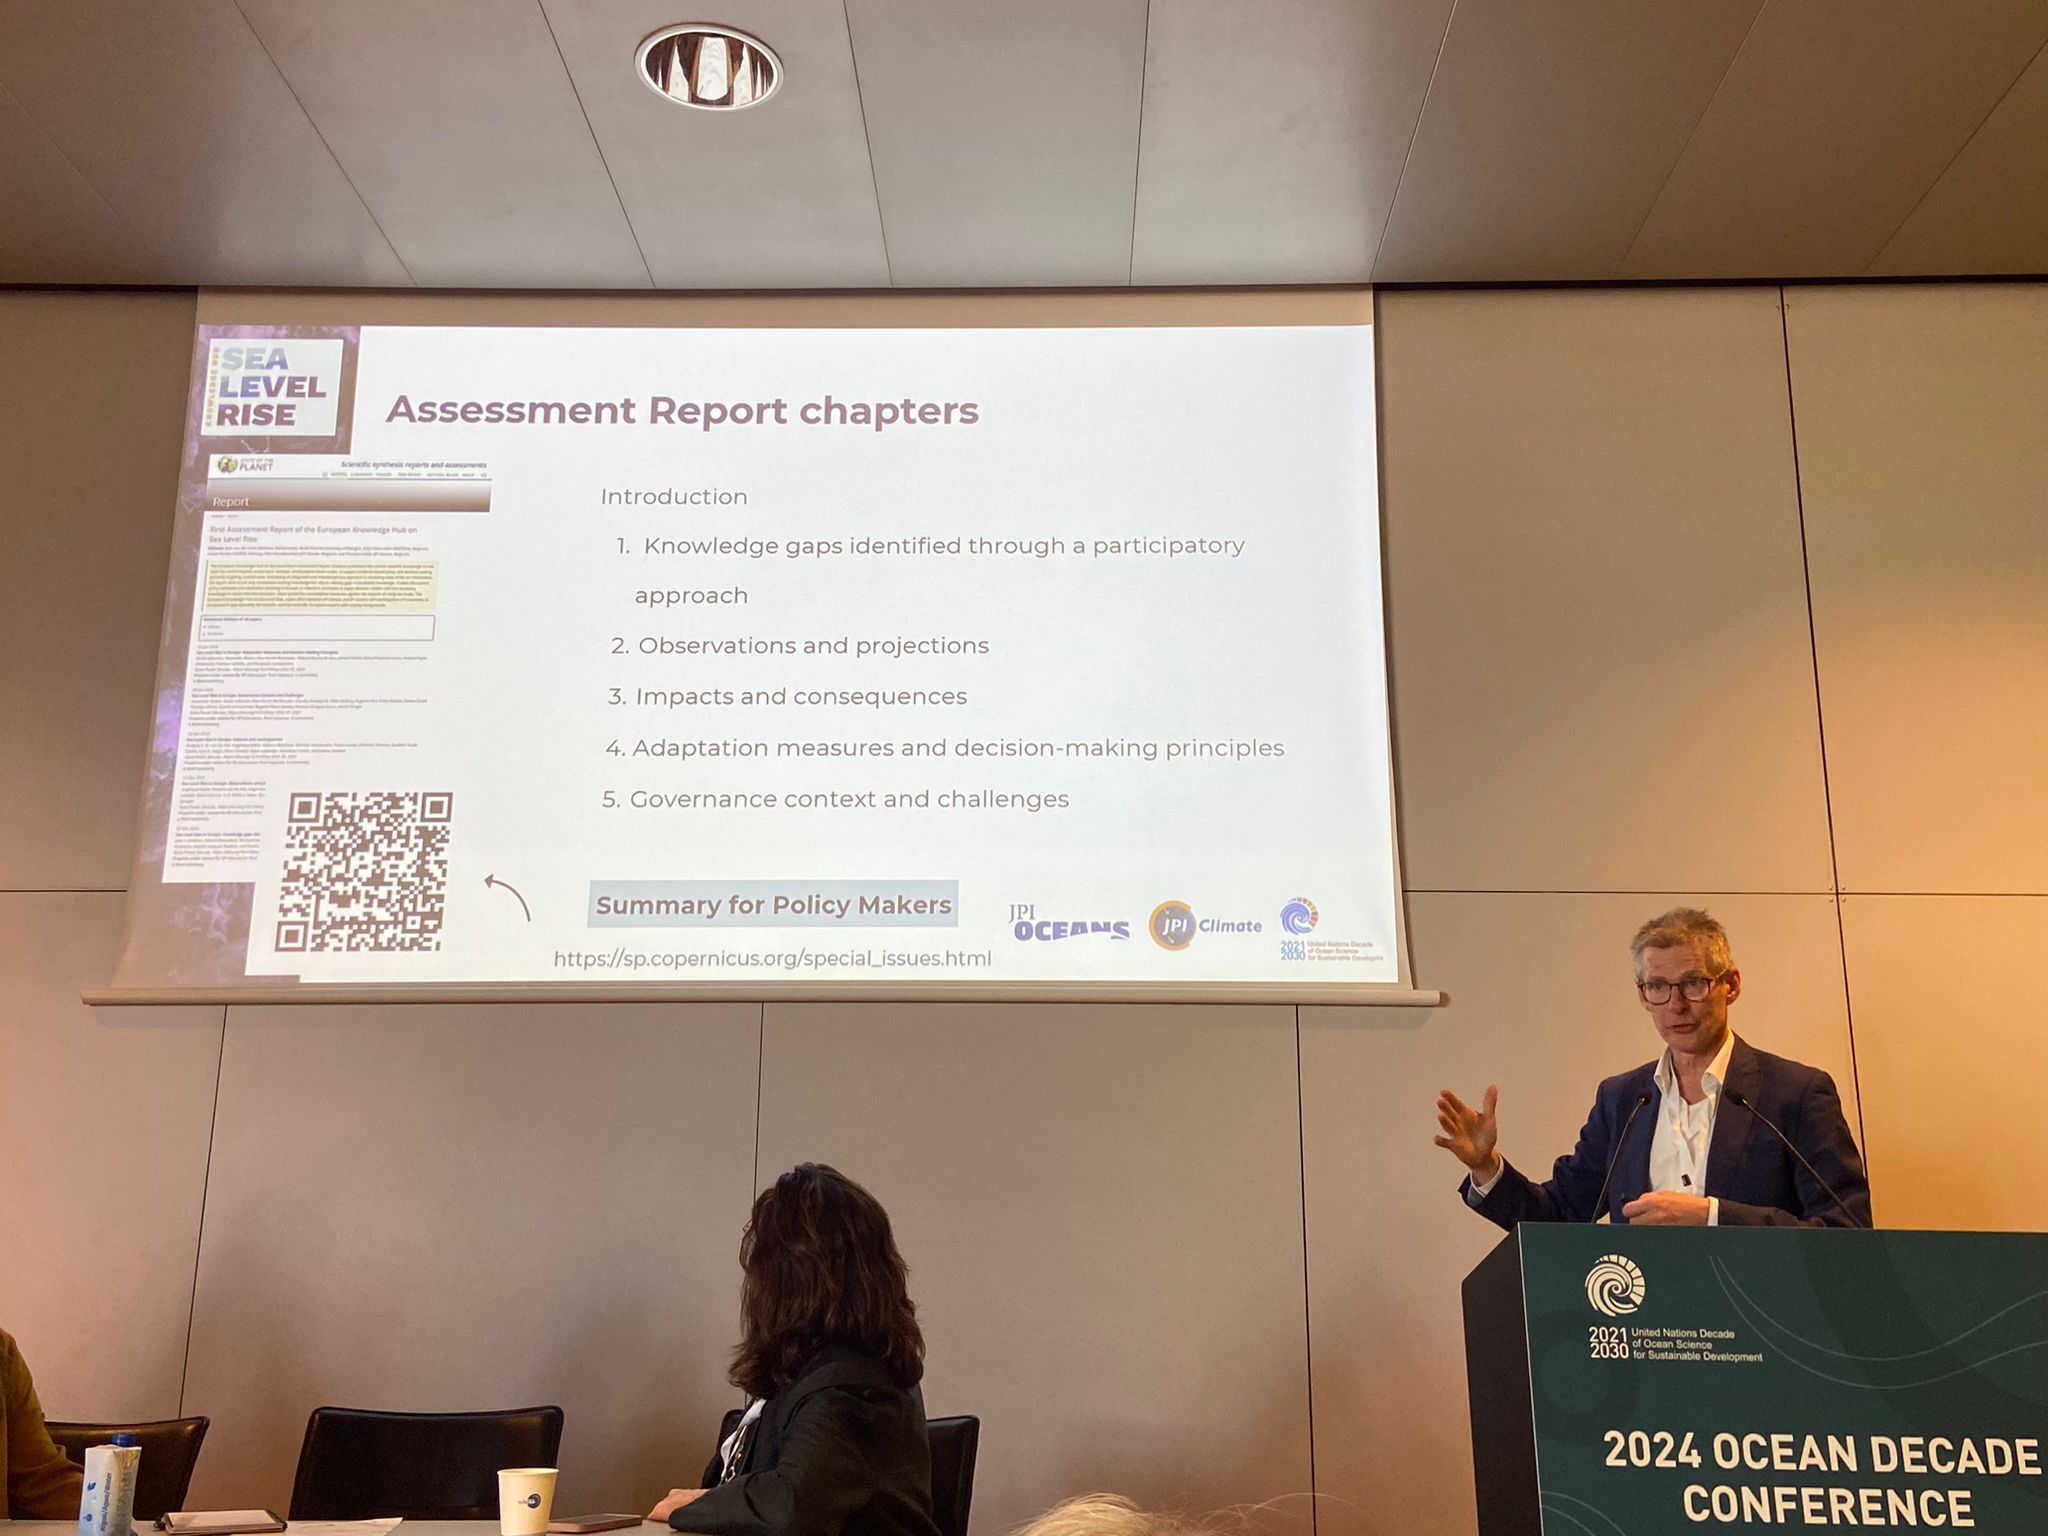 Bart van den Hurk, co-chair of the European Knowledge Hub Sea Level Rise and co-chair of WG2 of the IPCC presenting the Sea Level Rise Assessment Report chapters.